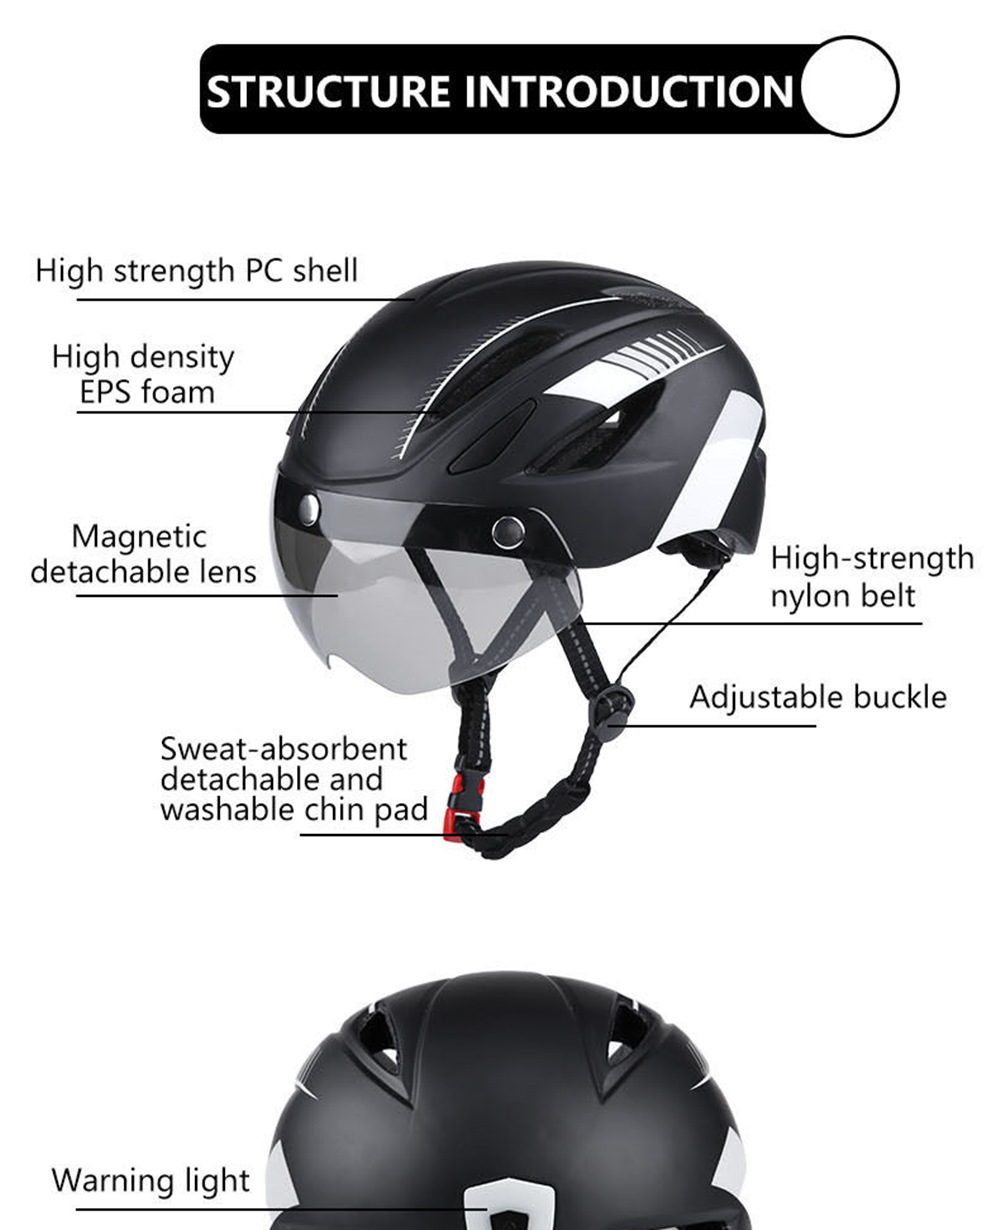 Magnetic helmet: a new choice for myopic riders - Blog - 3